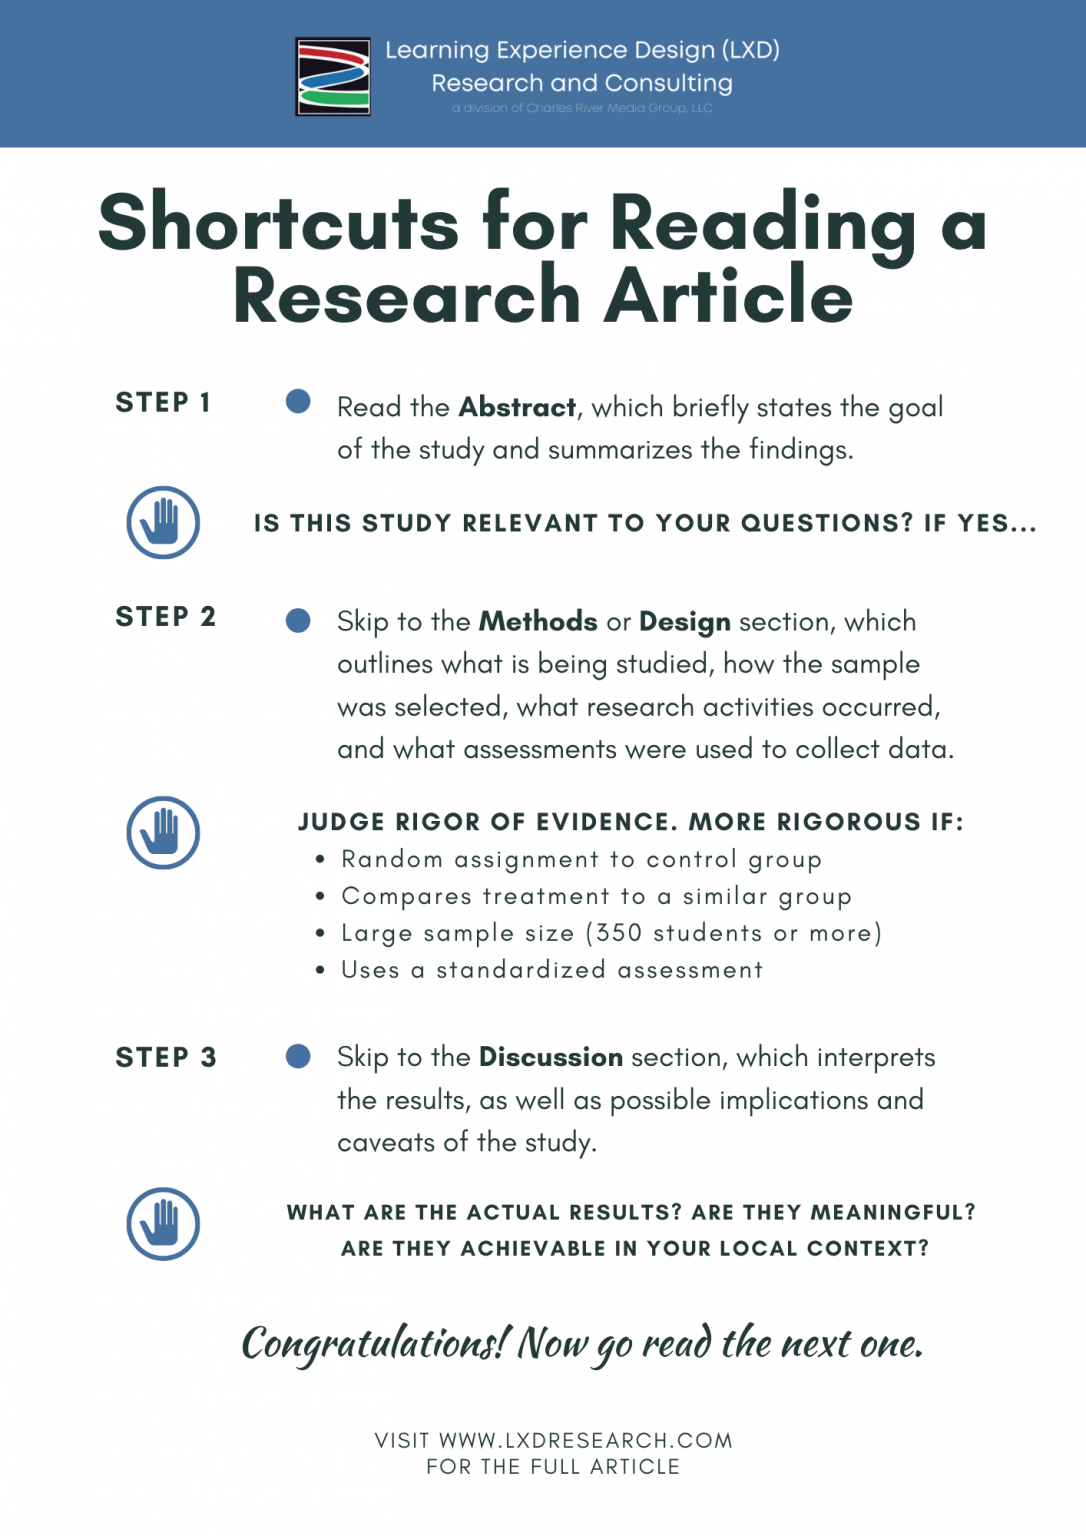 process of reading research articles